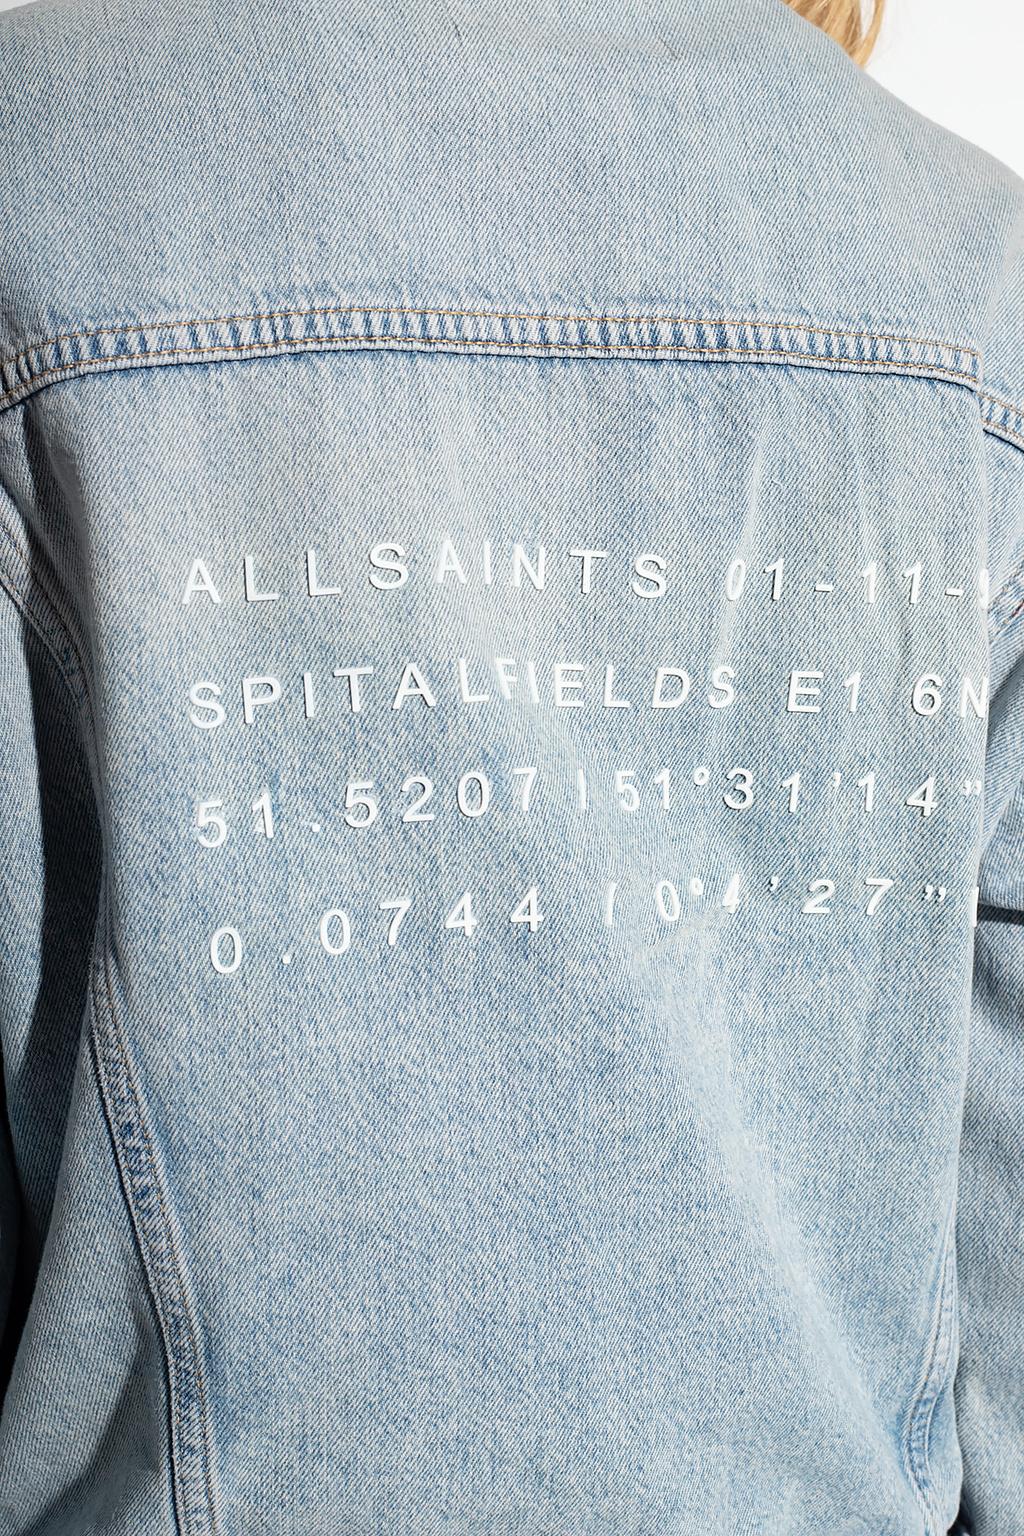 Buy Bible Verse Embroidered Denim Jacket Christian Jacket Online in India -  Etsy